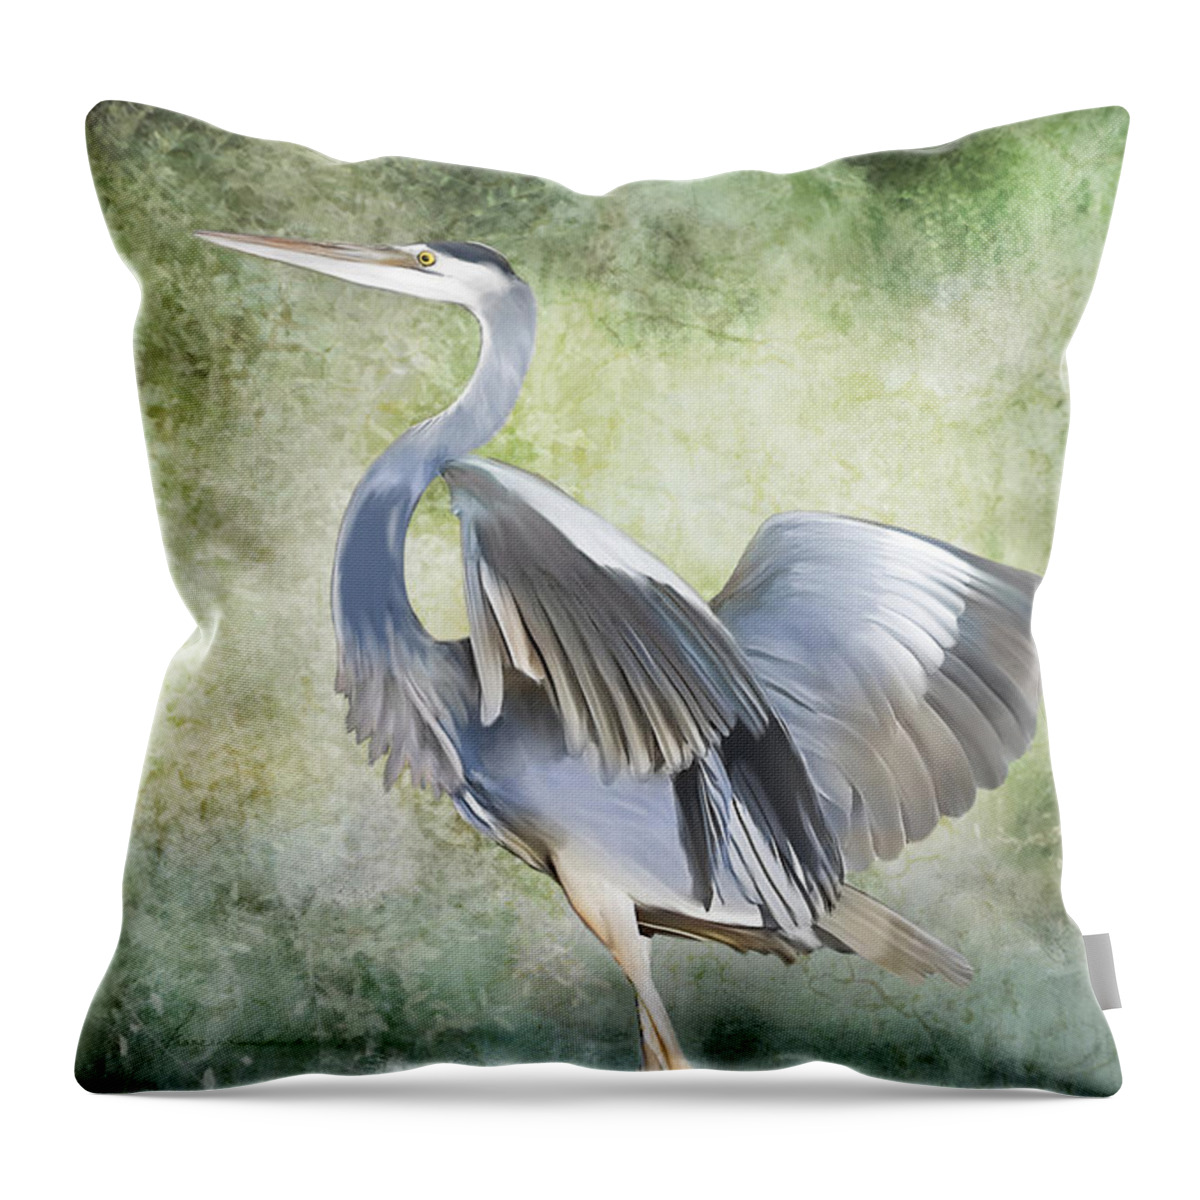 Heron; Great; Blue; Bird; Fowl; Waterfowl; Tropical; Tropic; Flight; Fly; Flying; Wings; Winged; Portrait; Swamp; Swampland; Marsh; Marshland; Landscape; Animal; Creature Throw Pillow featuring the digital art Great Blue Heron by Frances Miller